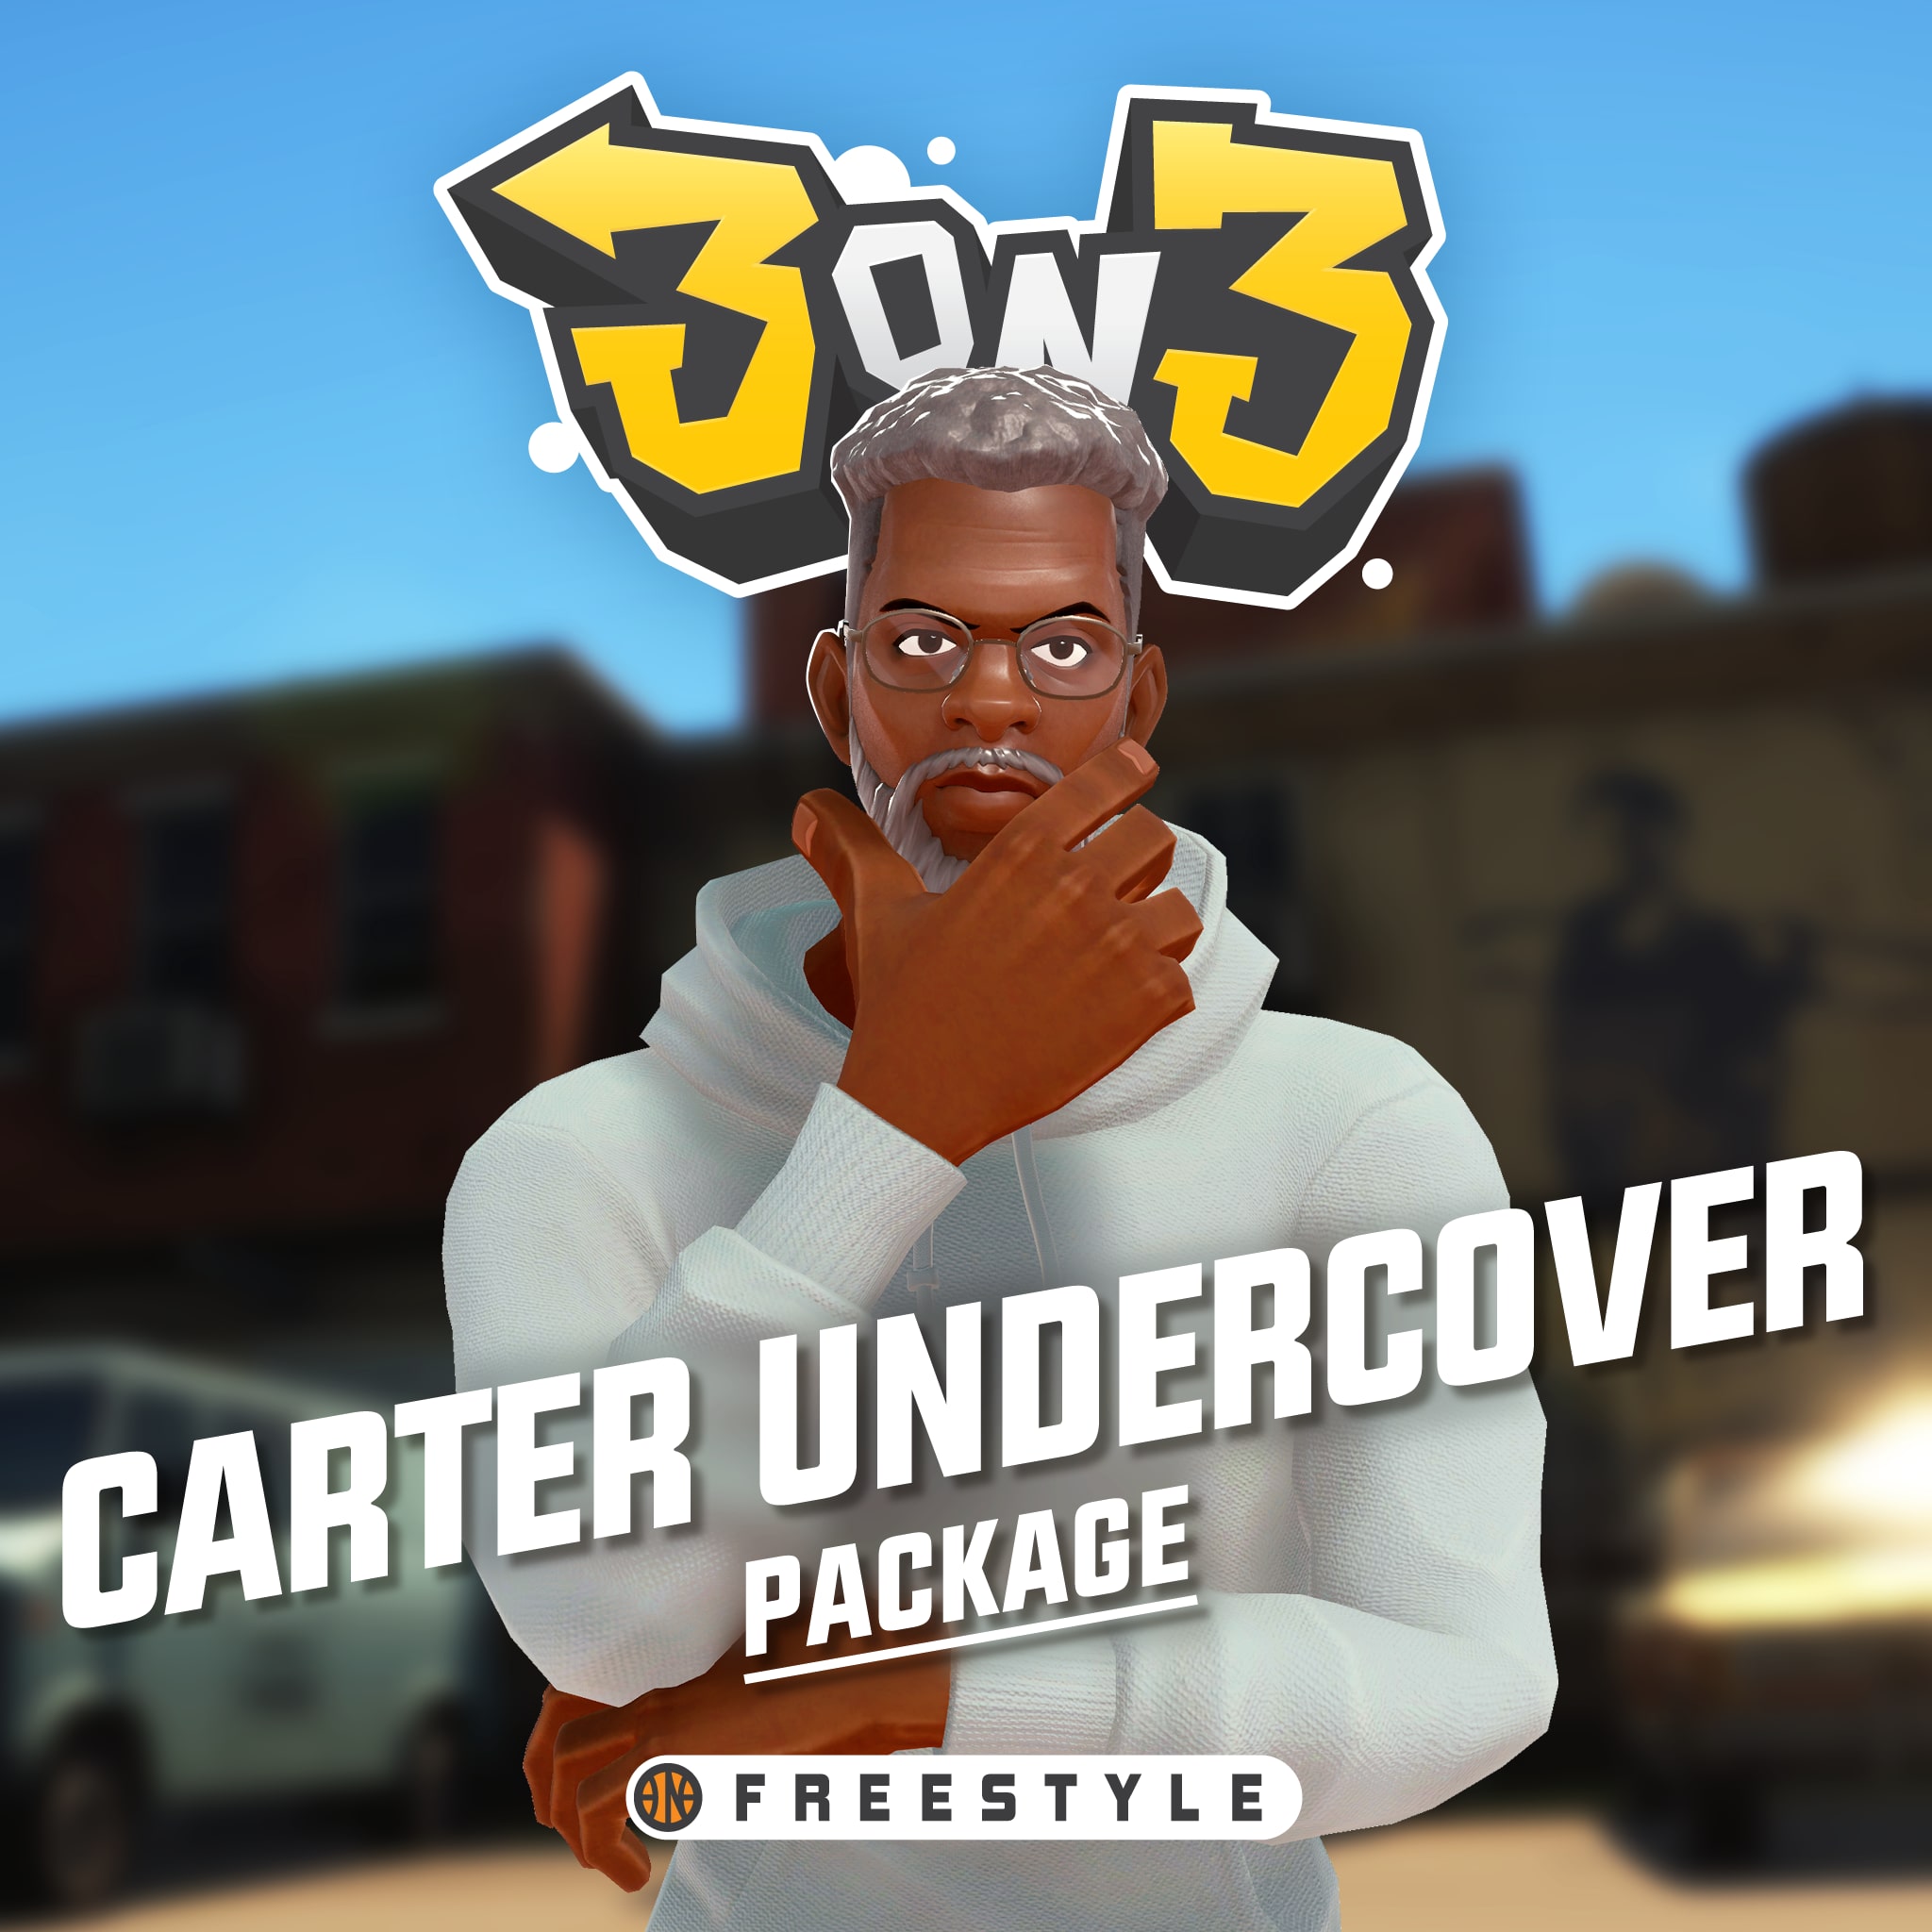 3on3 FreeStyle – Carter Undercover Pack